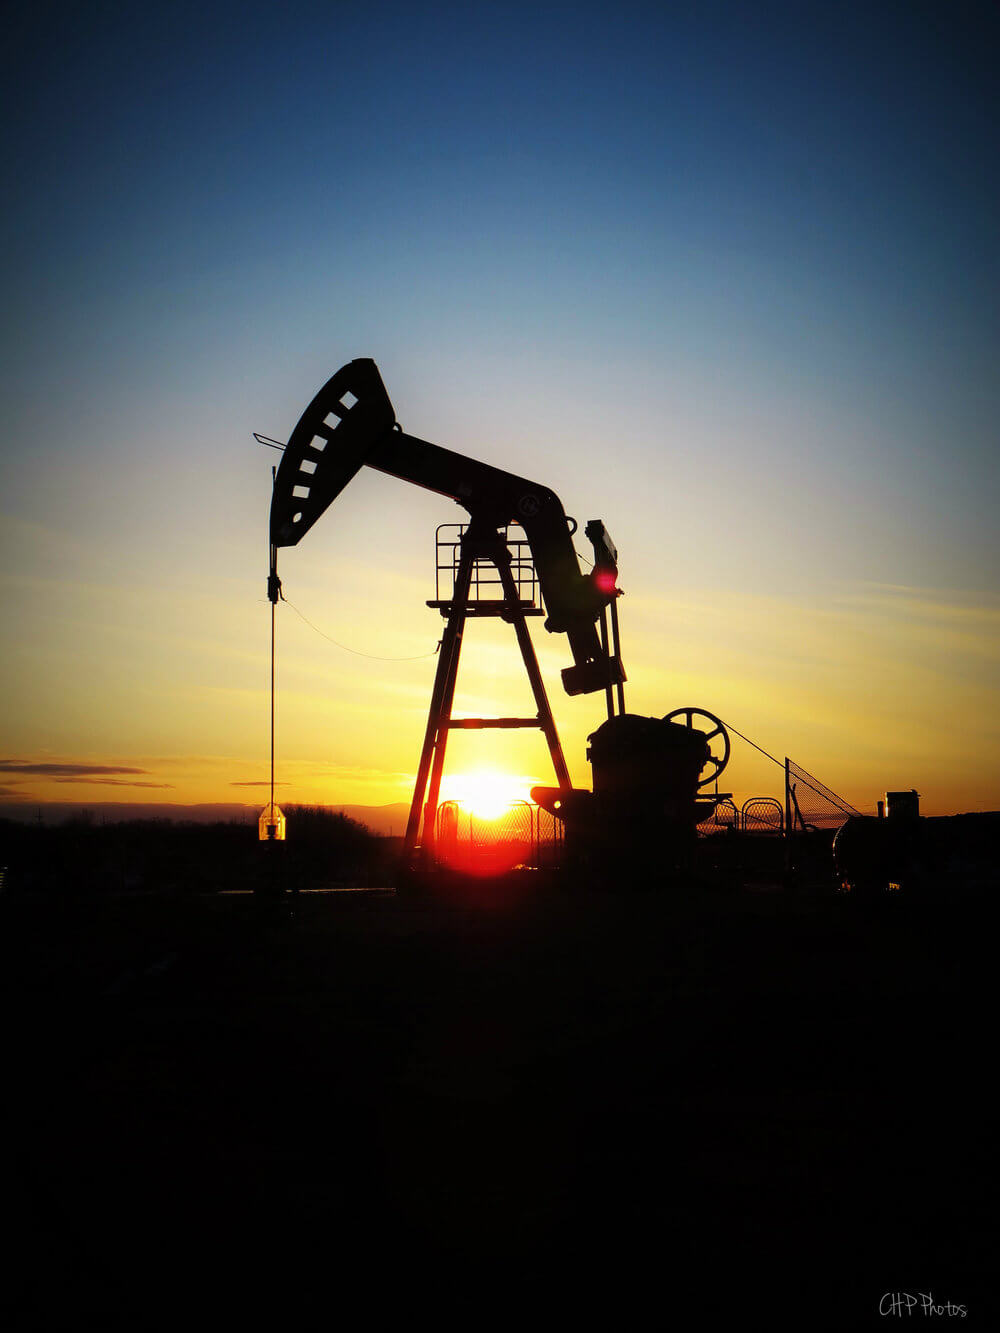 View of an oil derrick with sunset behind